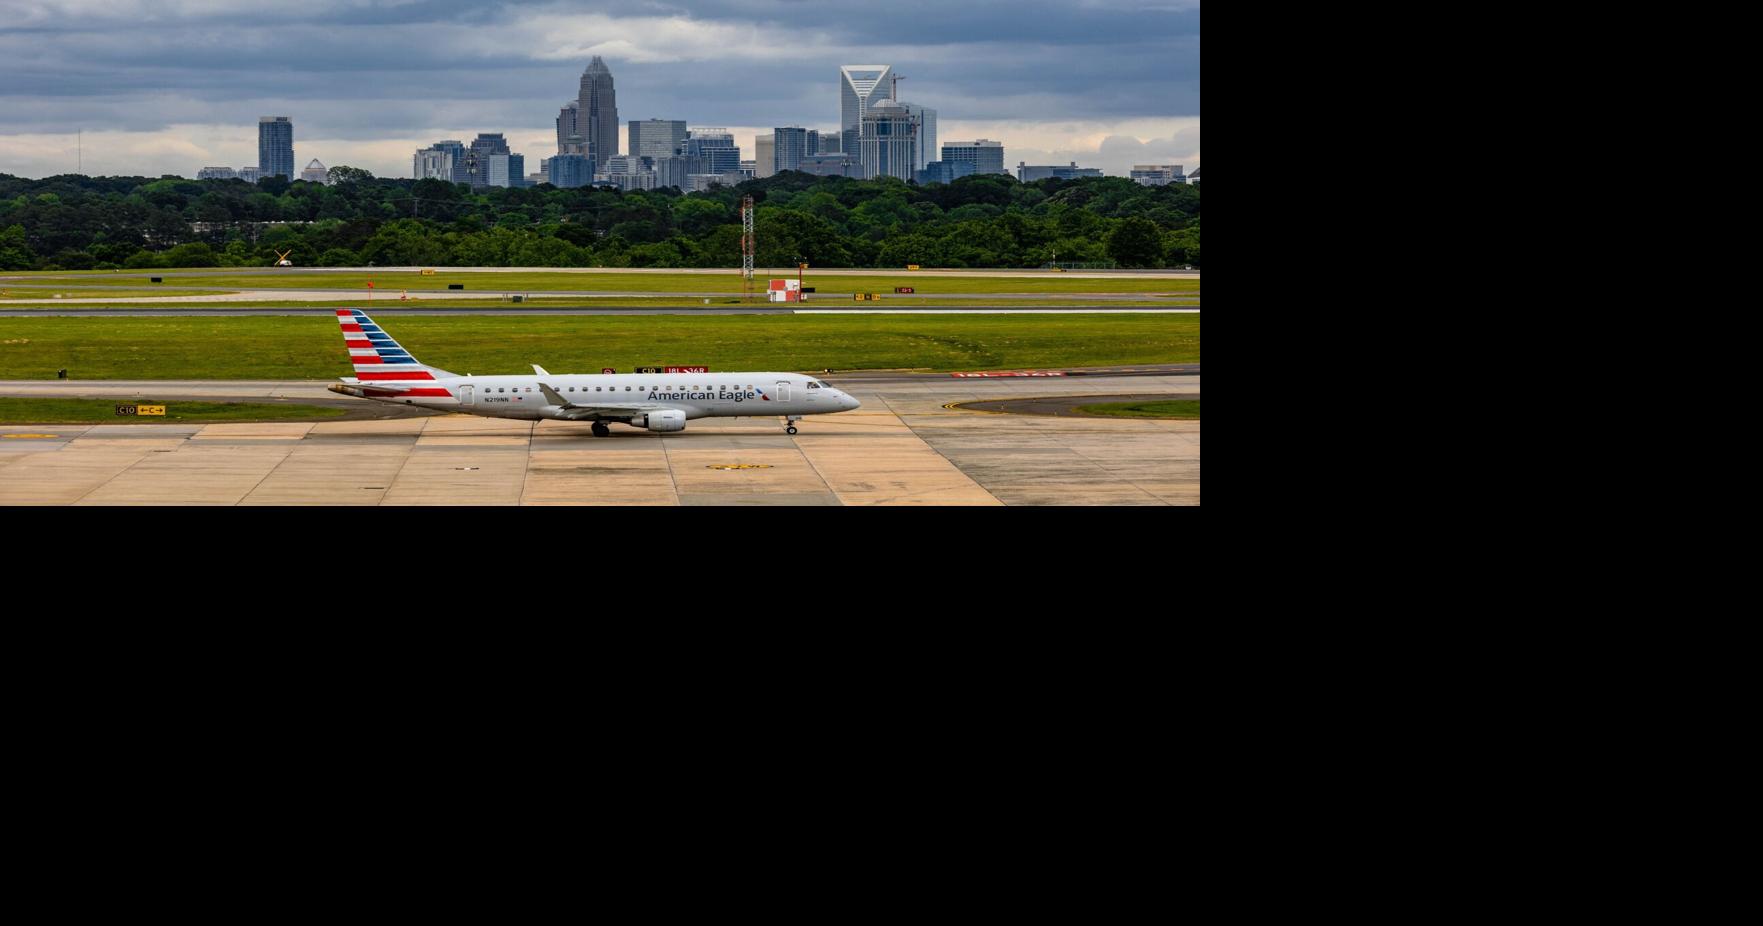 North Carolina airports to receive $20.3M in federal funds for improvements